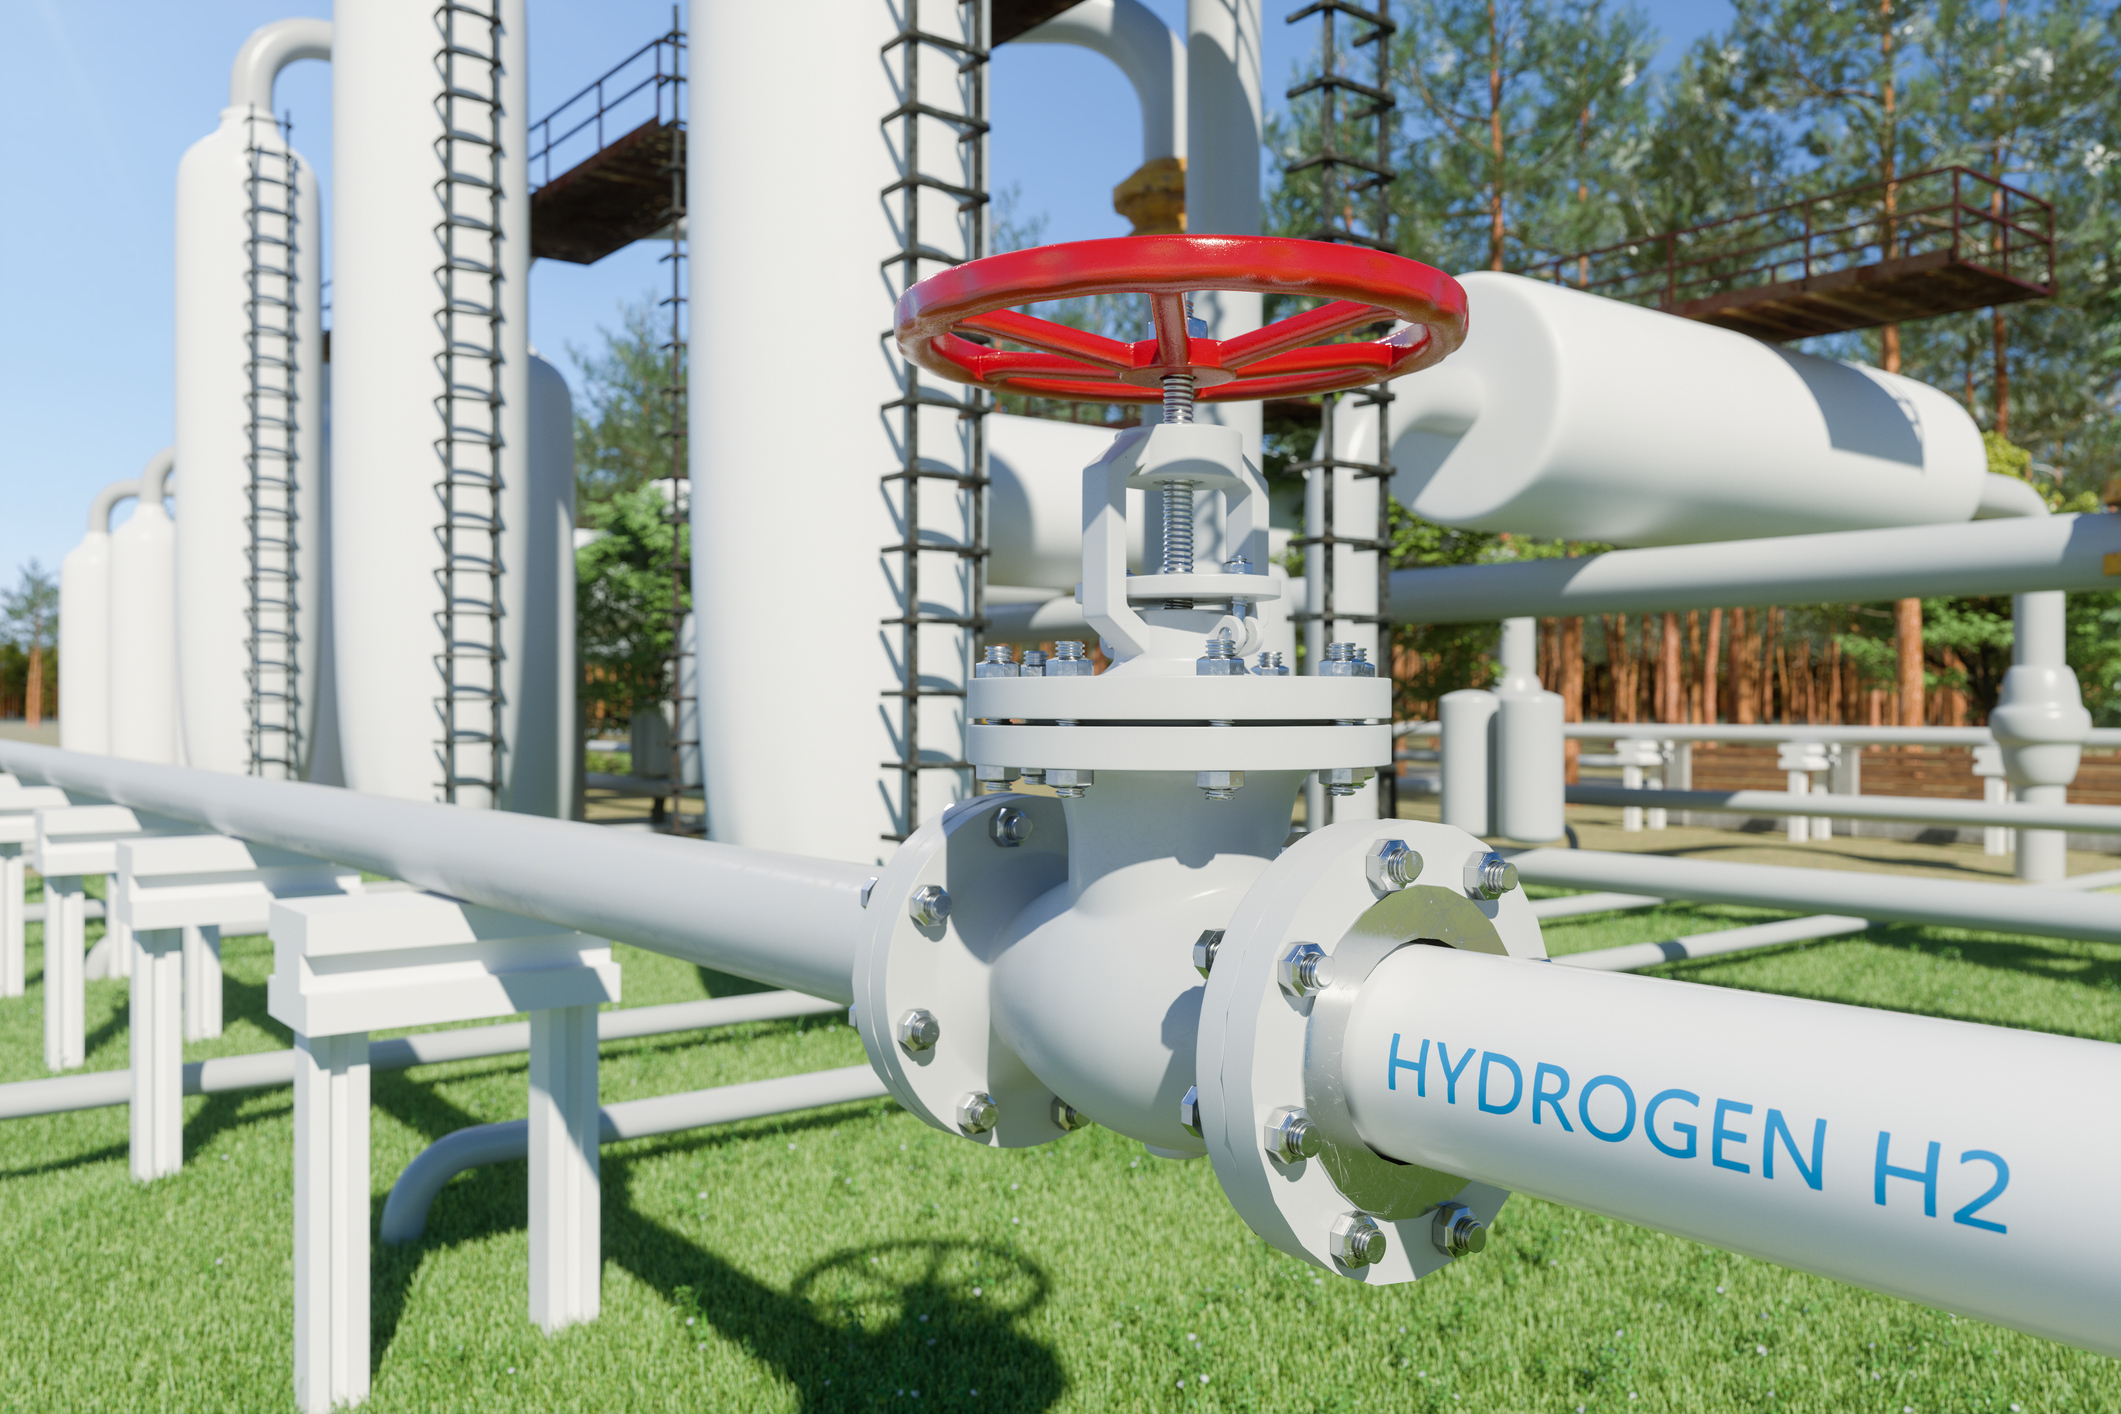 White pipes with a red release valve with 'Hydrogen H2' written on the side of a pipe.